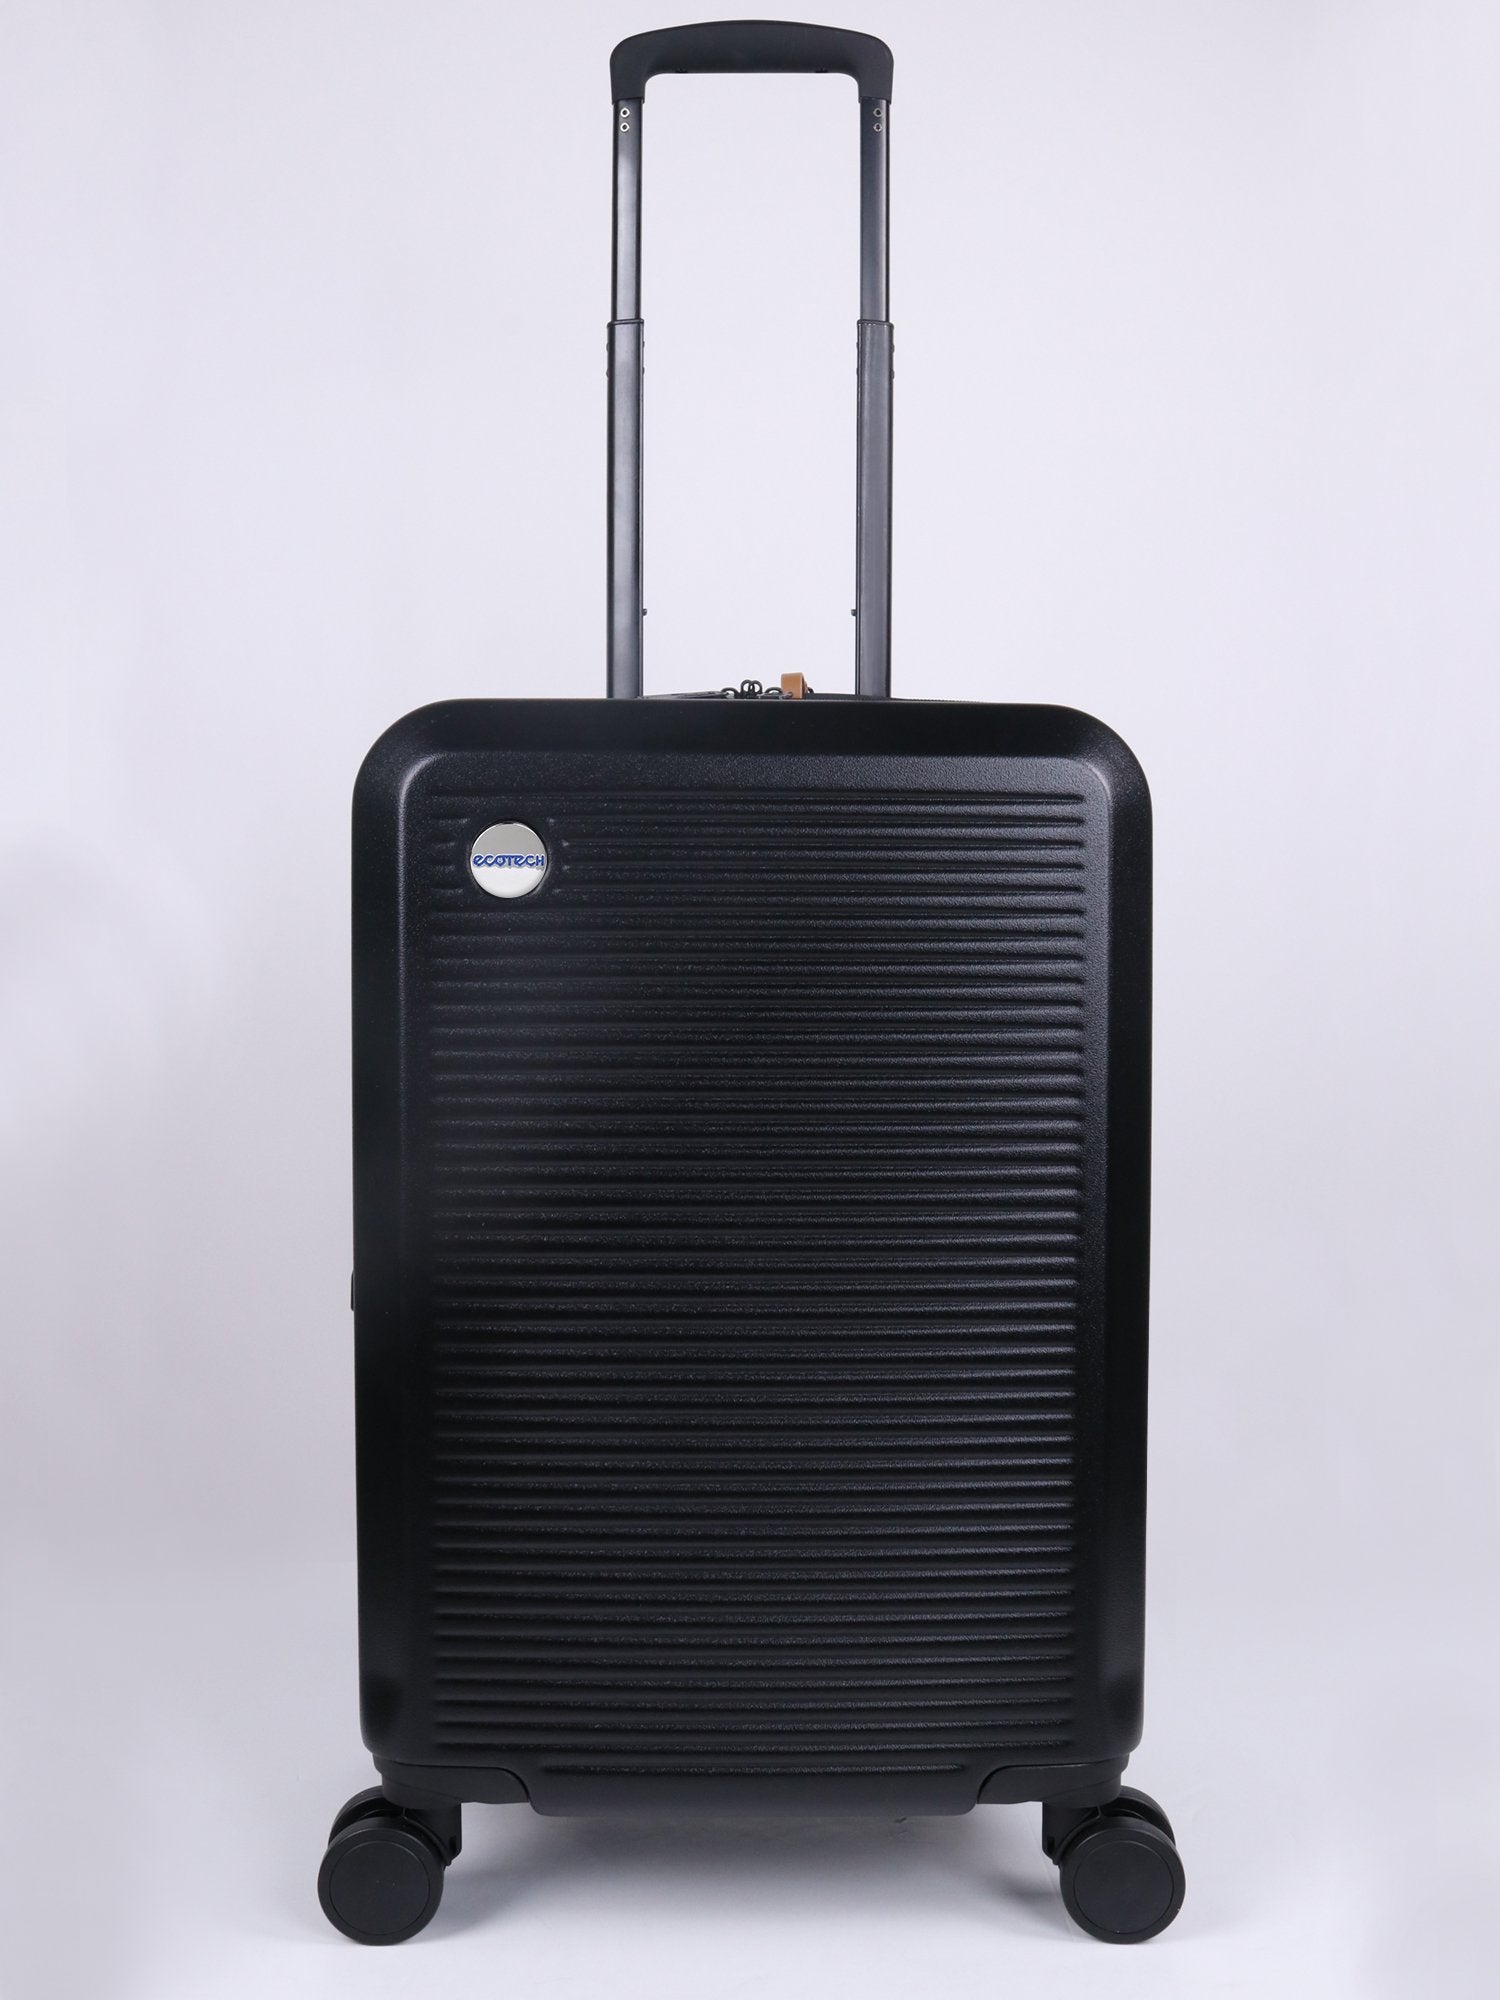 ECOTECH SPINNER CARRY ON LUGGAGE, BLACK